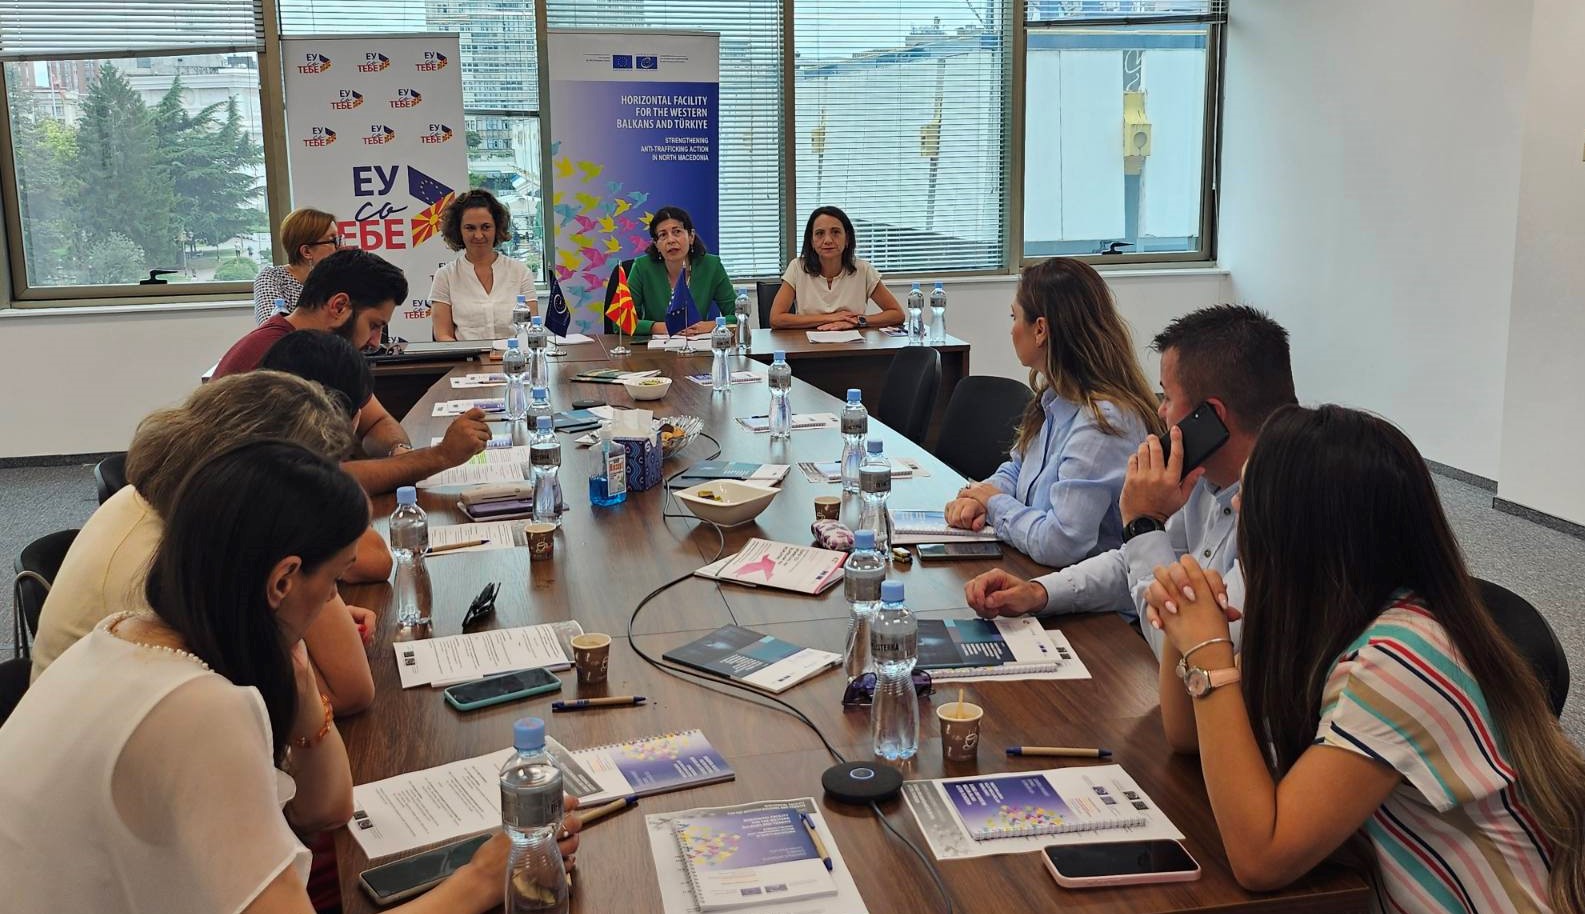 Anti-trafficking partners and beneficiaries confirm their co-operation to advance the fight against trafficking in North Macedonia